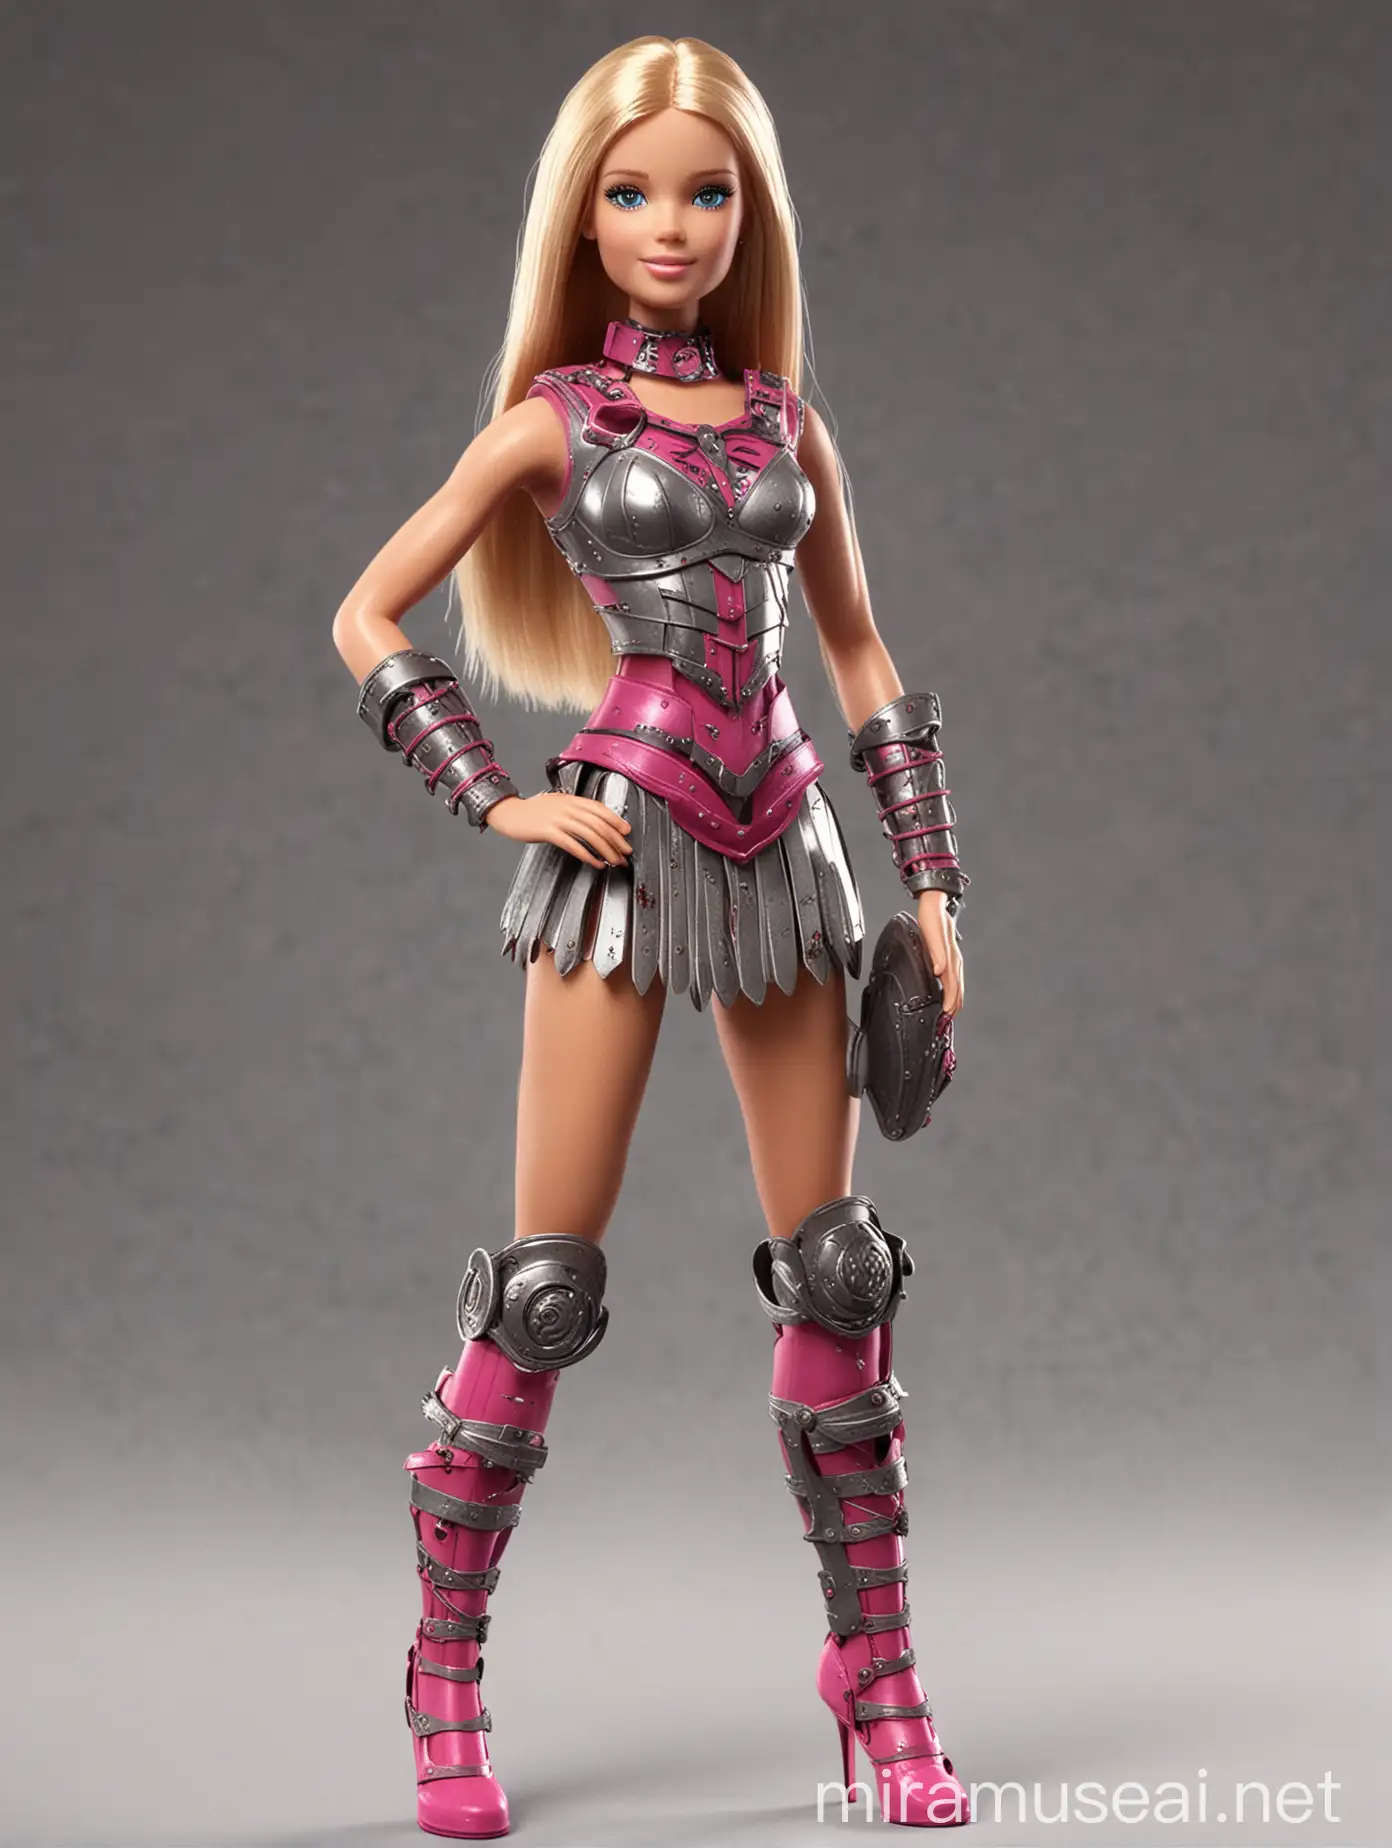 Barbie Gladiator Stylish Doll Poses in 3D Rendering